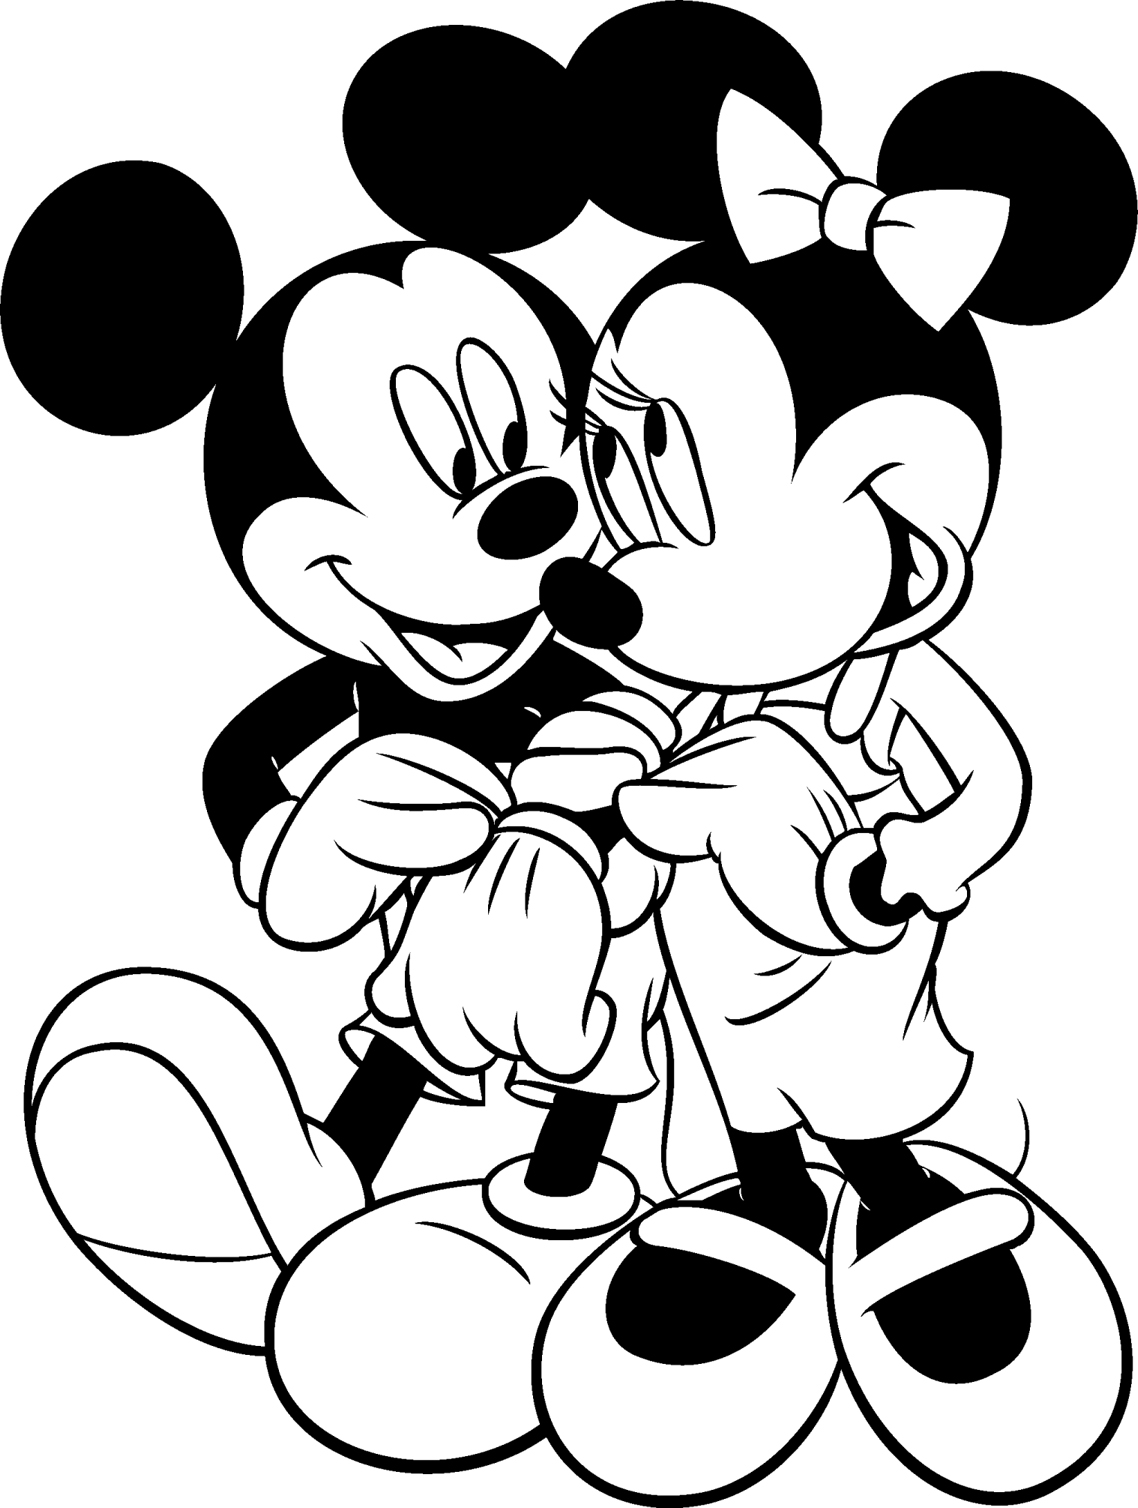 mickey mouse coloring ultimate pictures mix disney coloring pages mickey coloring mouse 